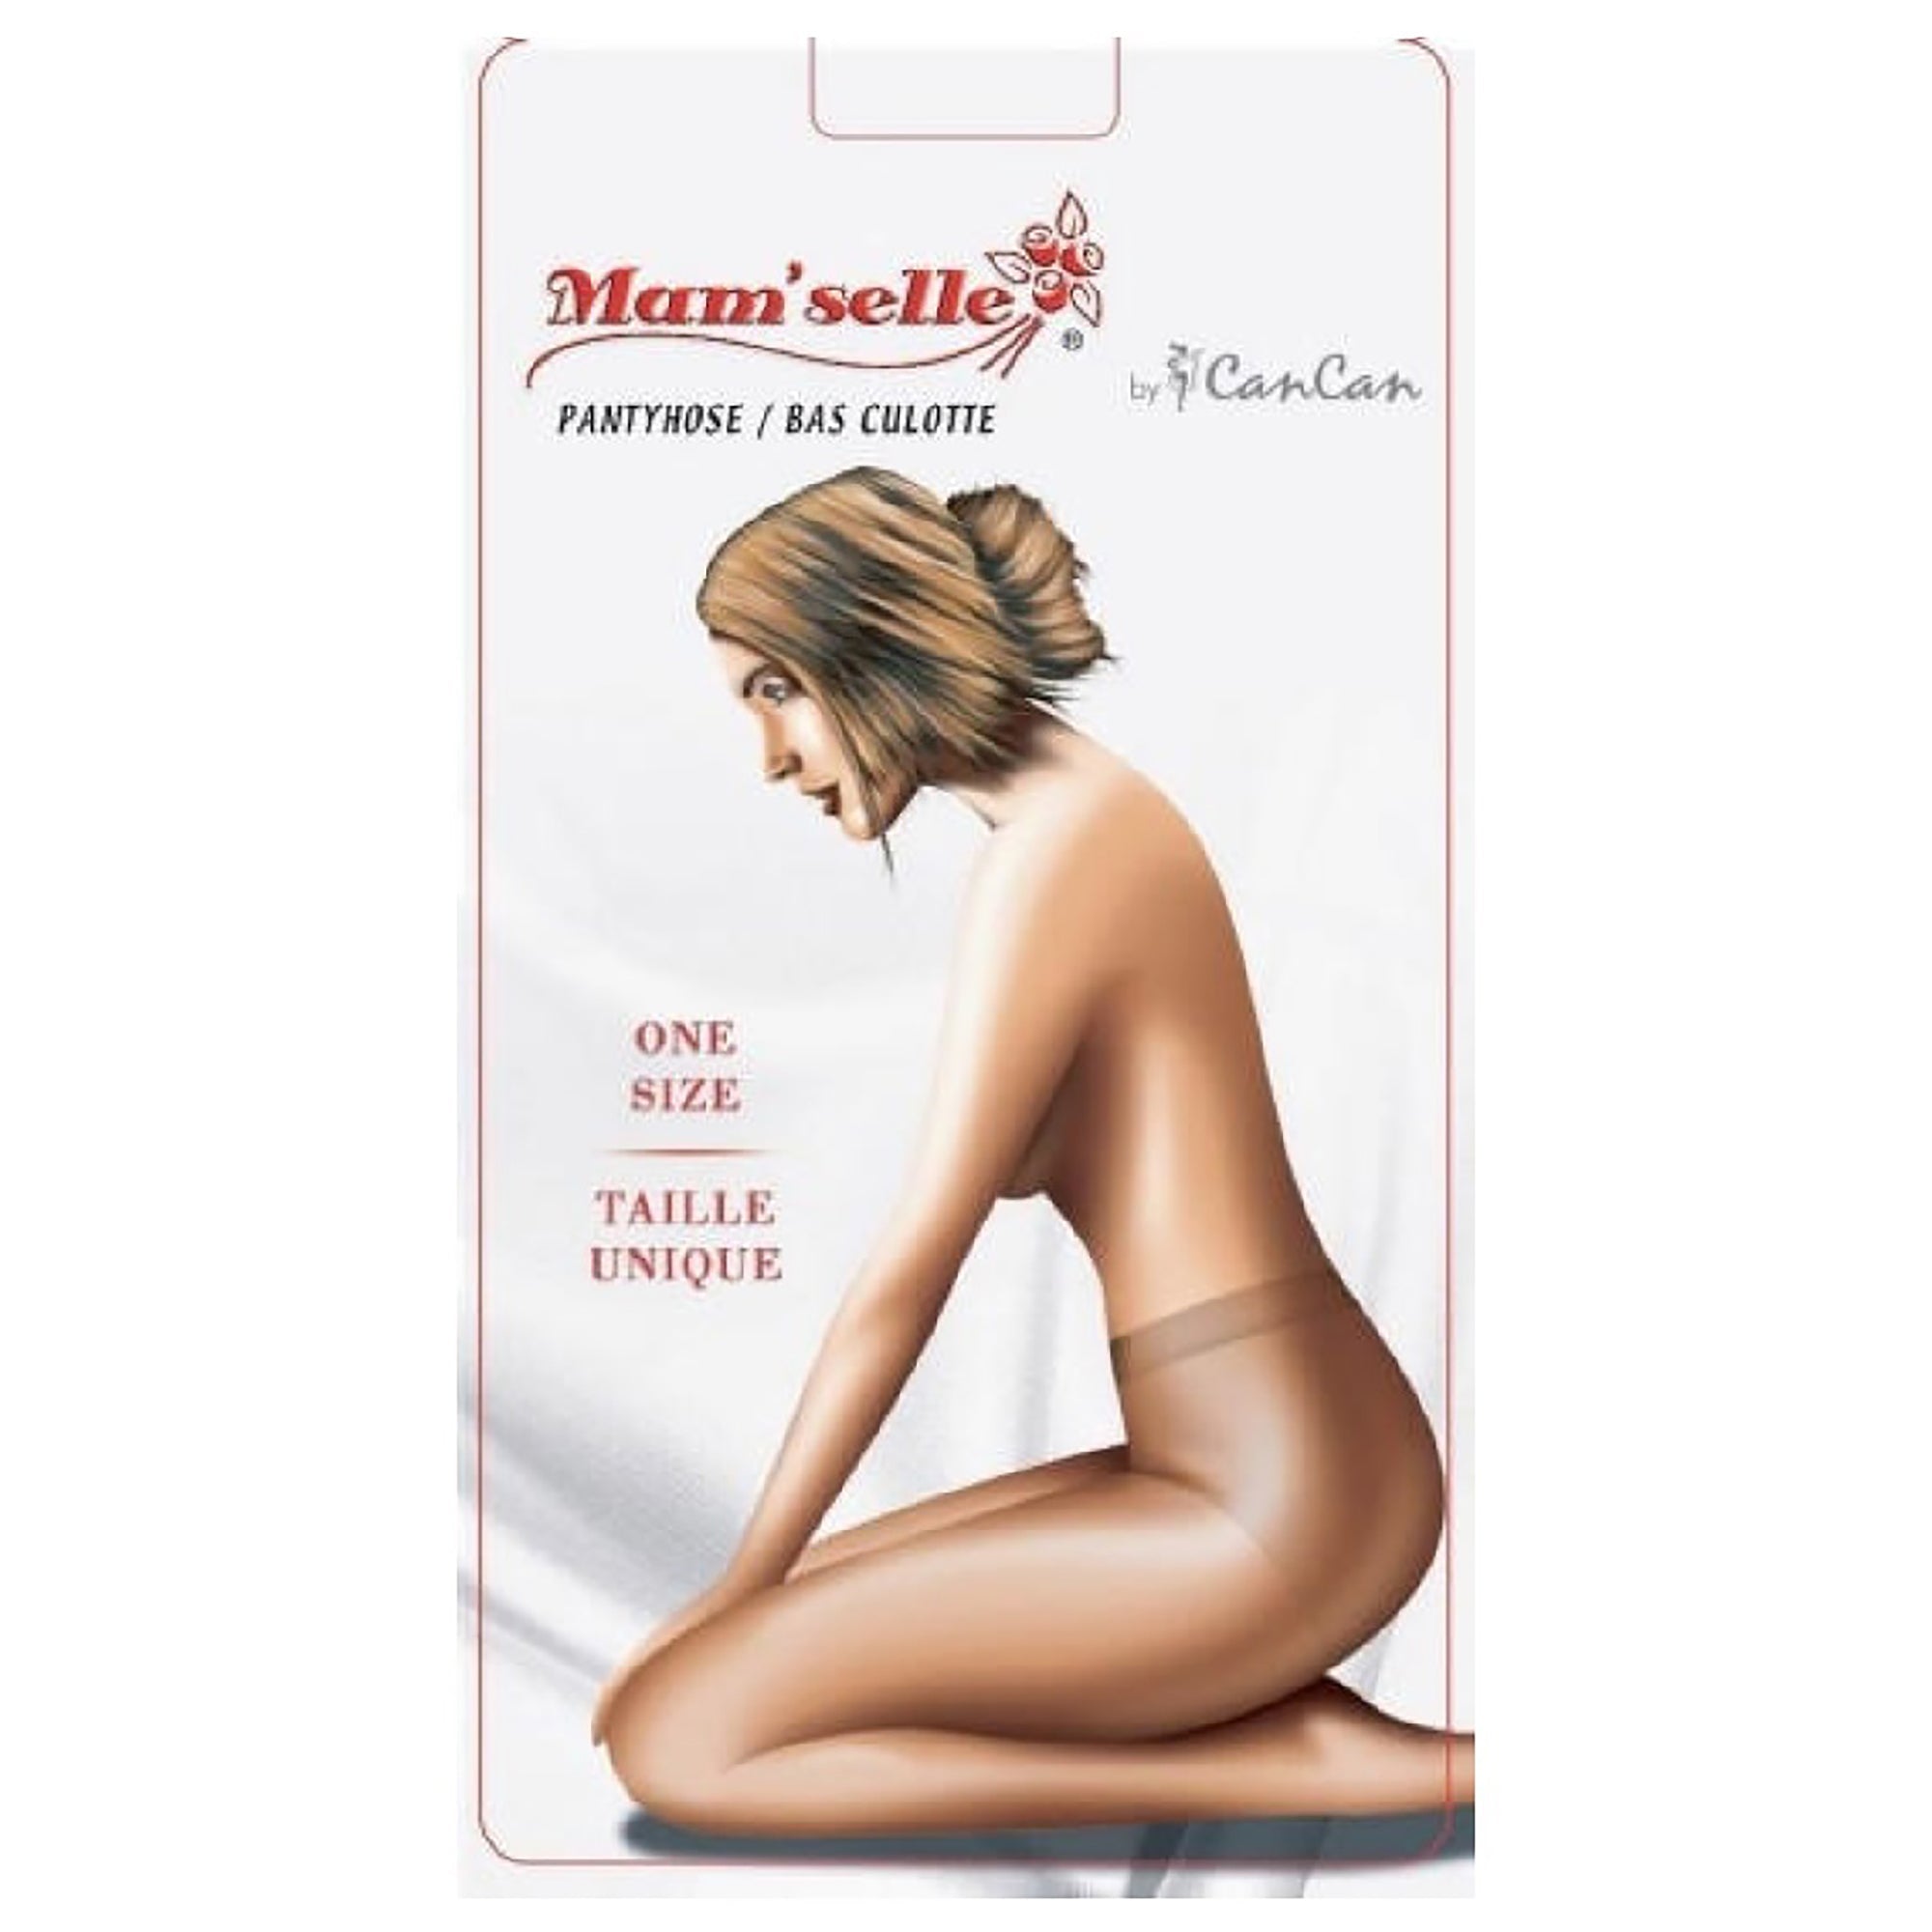 Mam'selle Panty Hose - Charcoal 20 Denier - One Size (100-150lbs)